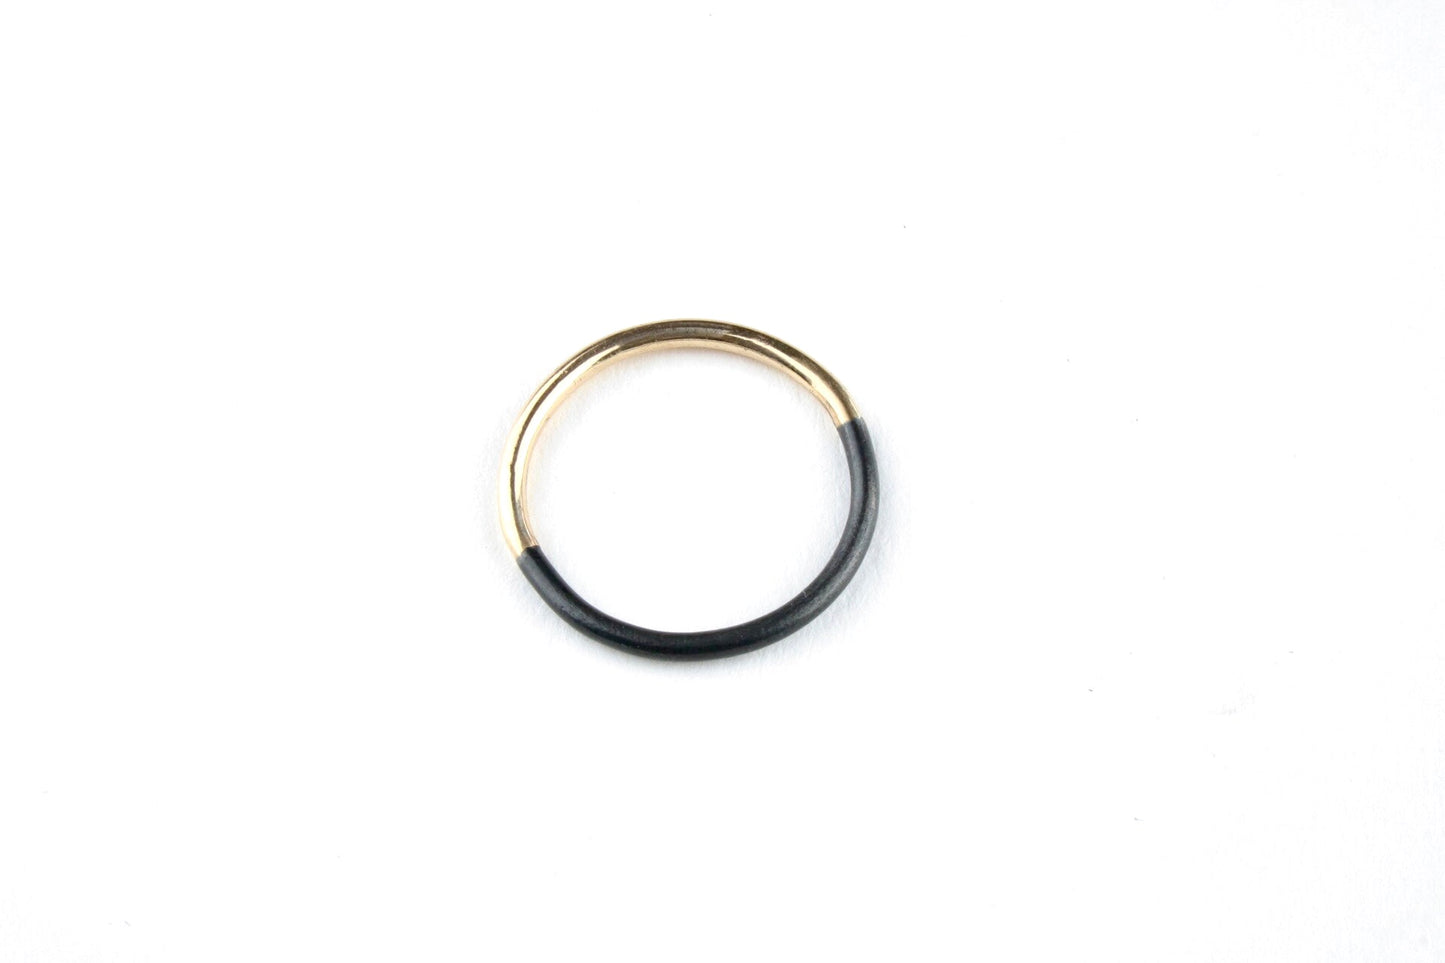 50/50 Ring in Gold and Steel -rings- Lindsey Snell